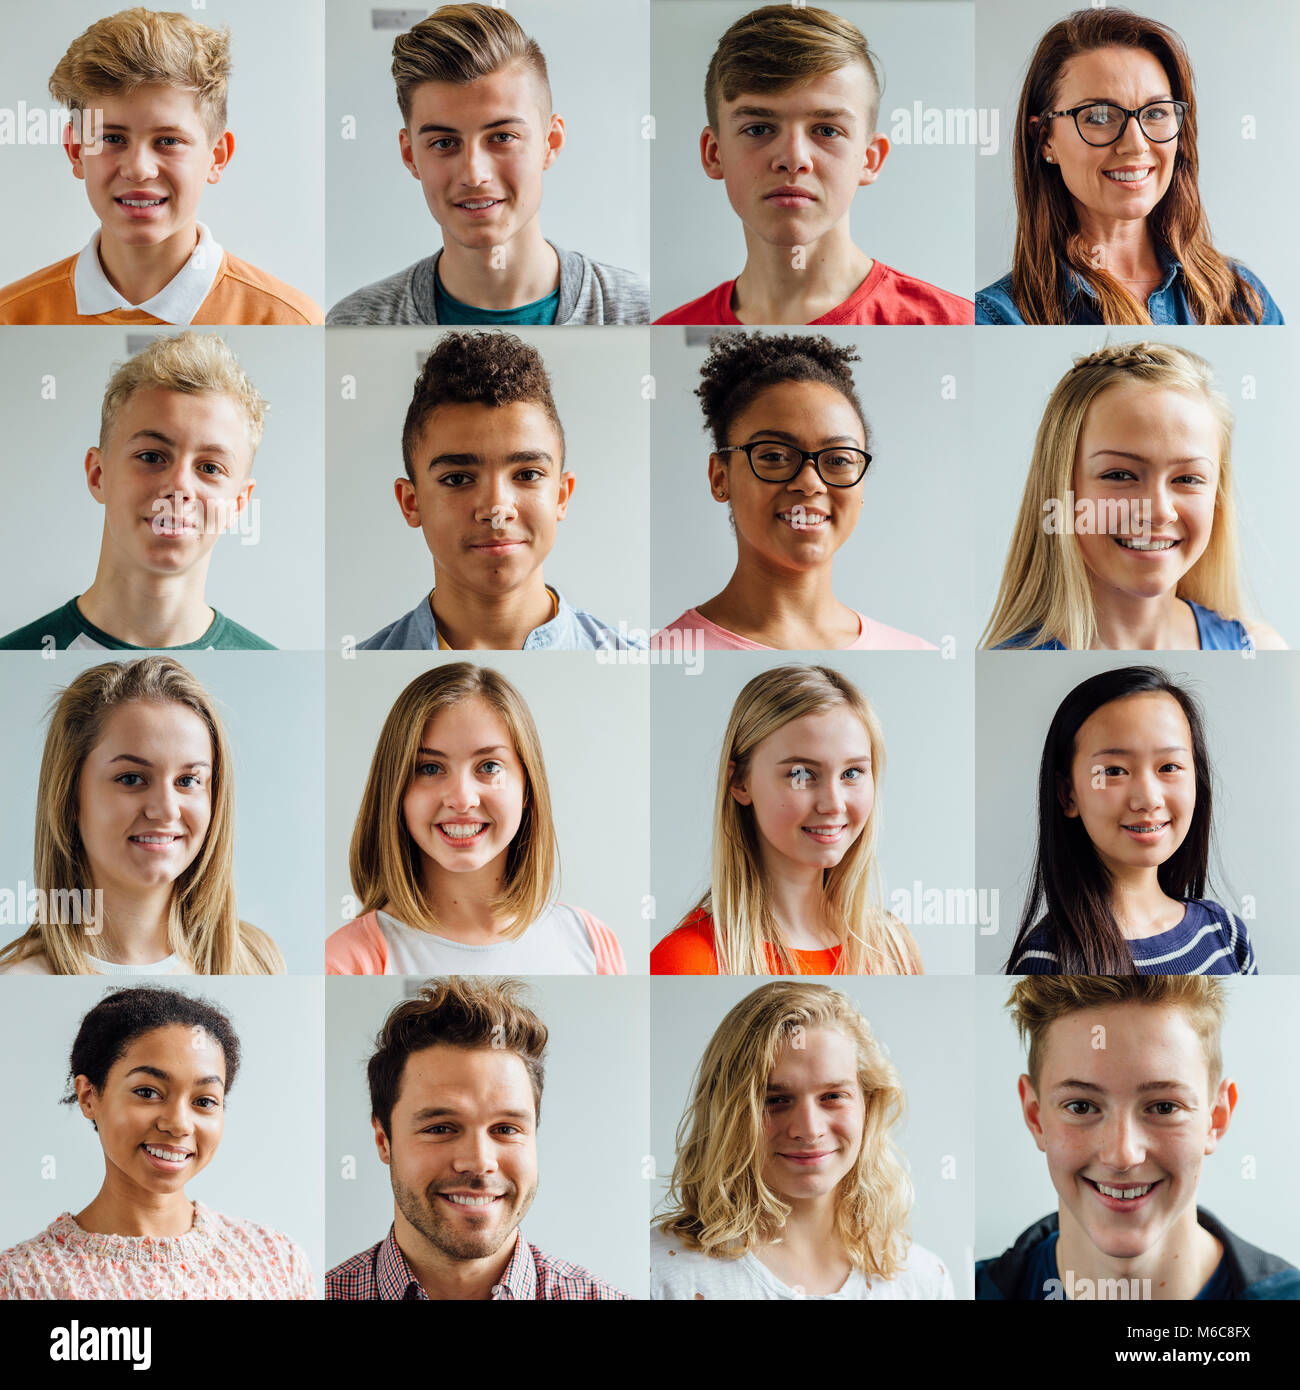 4x4 collage of headshots of high school students and teachers. They are wearing casual and formal clothing and are smiling. Stock Photo